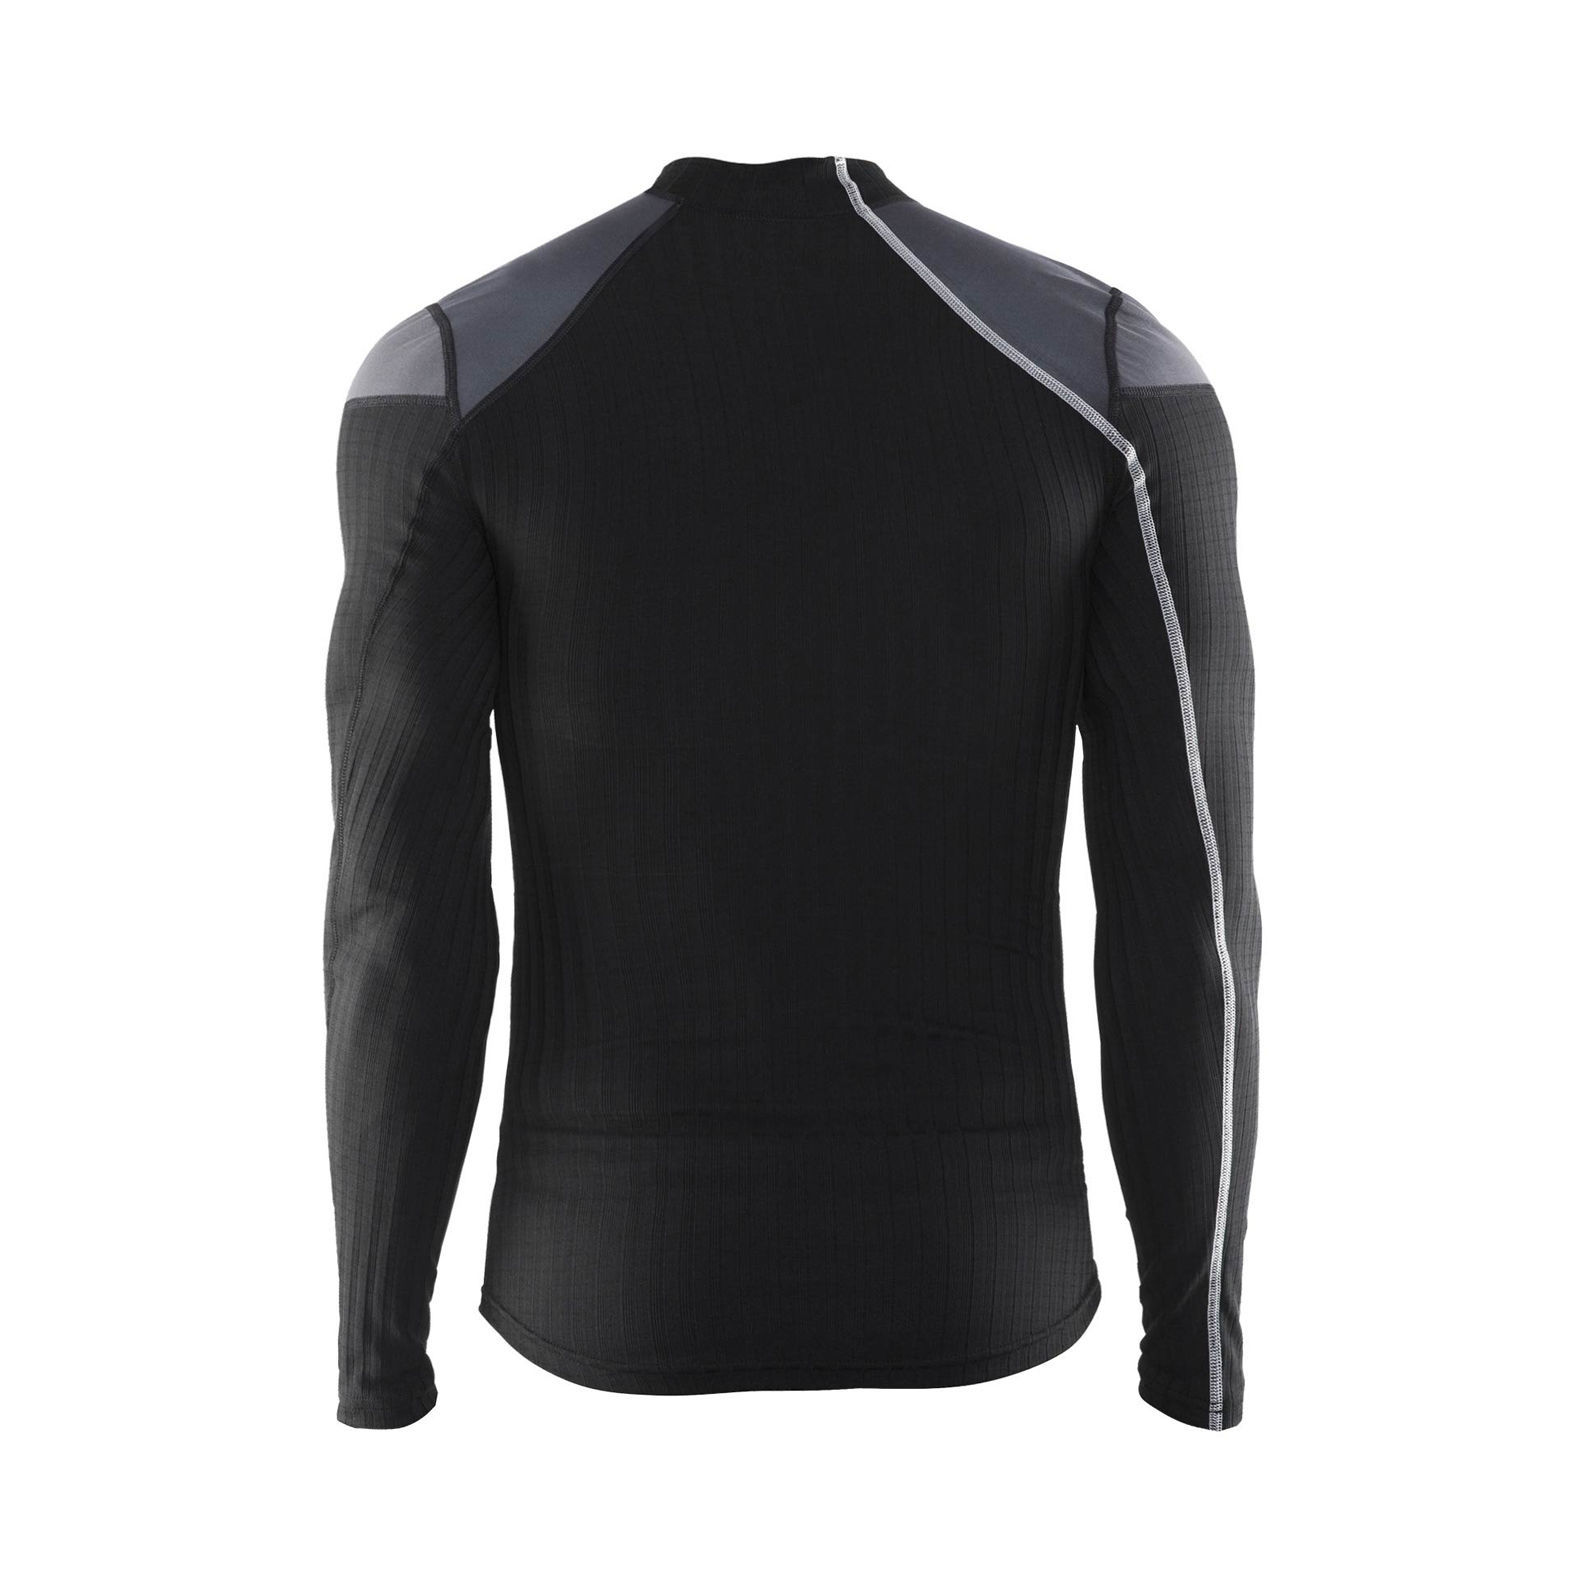 CRAFT BE ACTIVE EXTREME WINDSTOPPER maglia intima invernale 